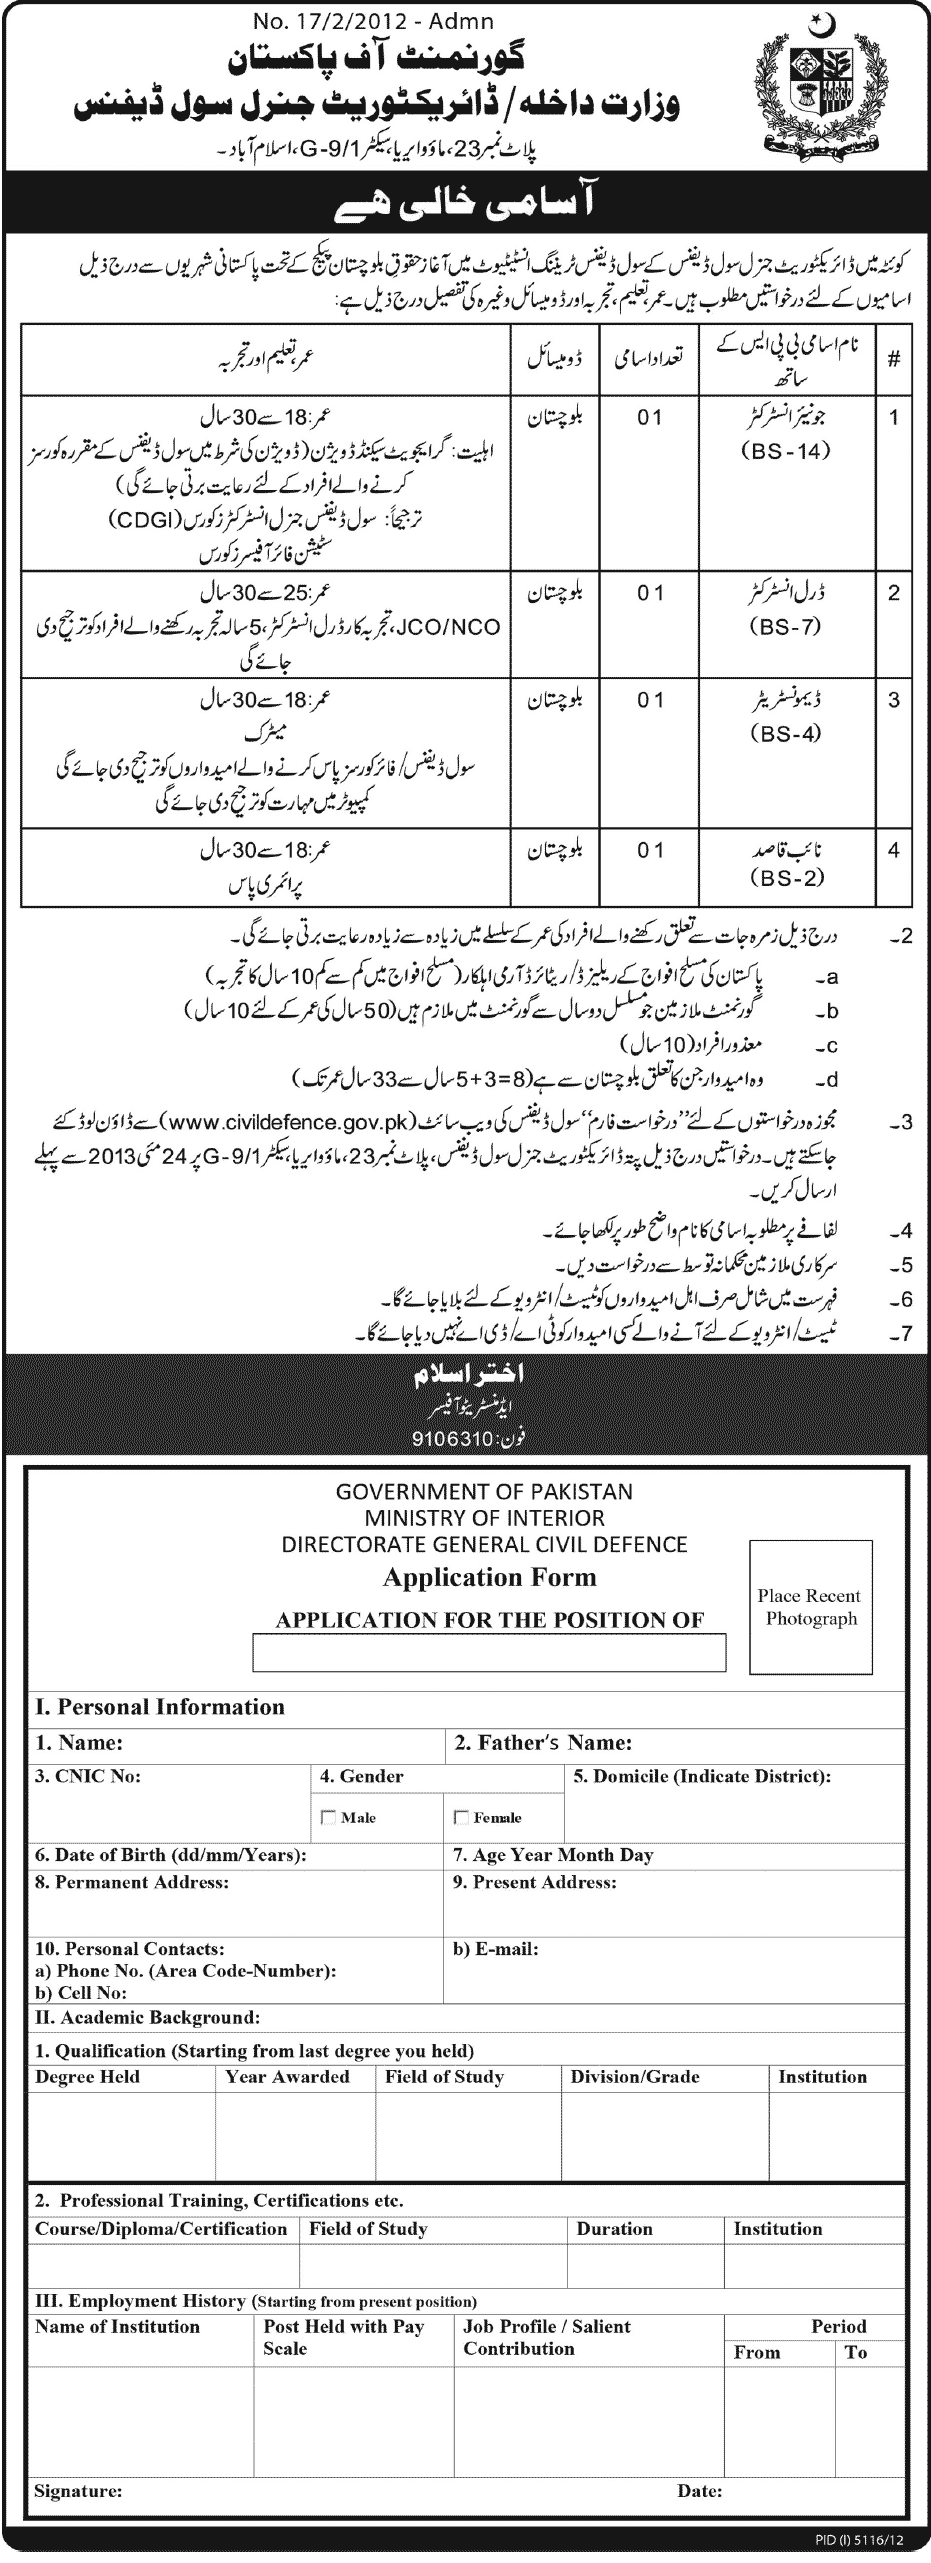 Jobs in pakistan government 2013